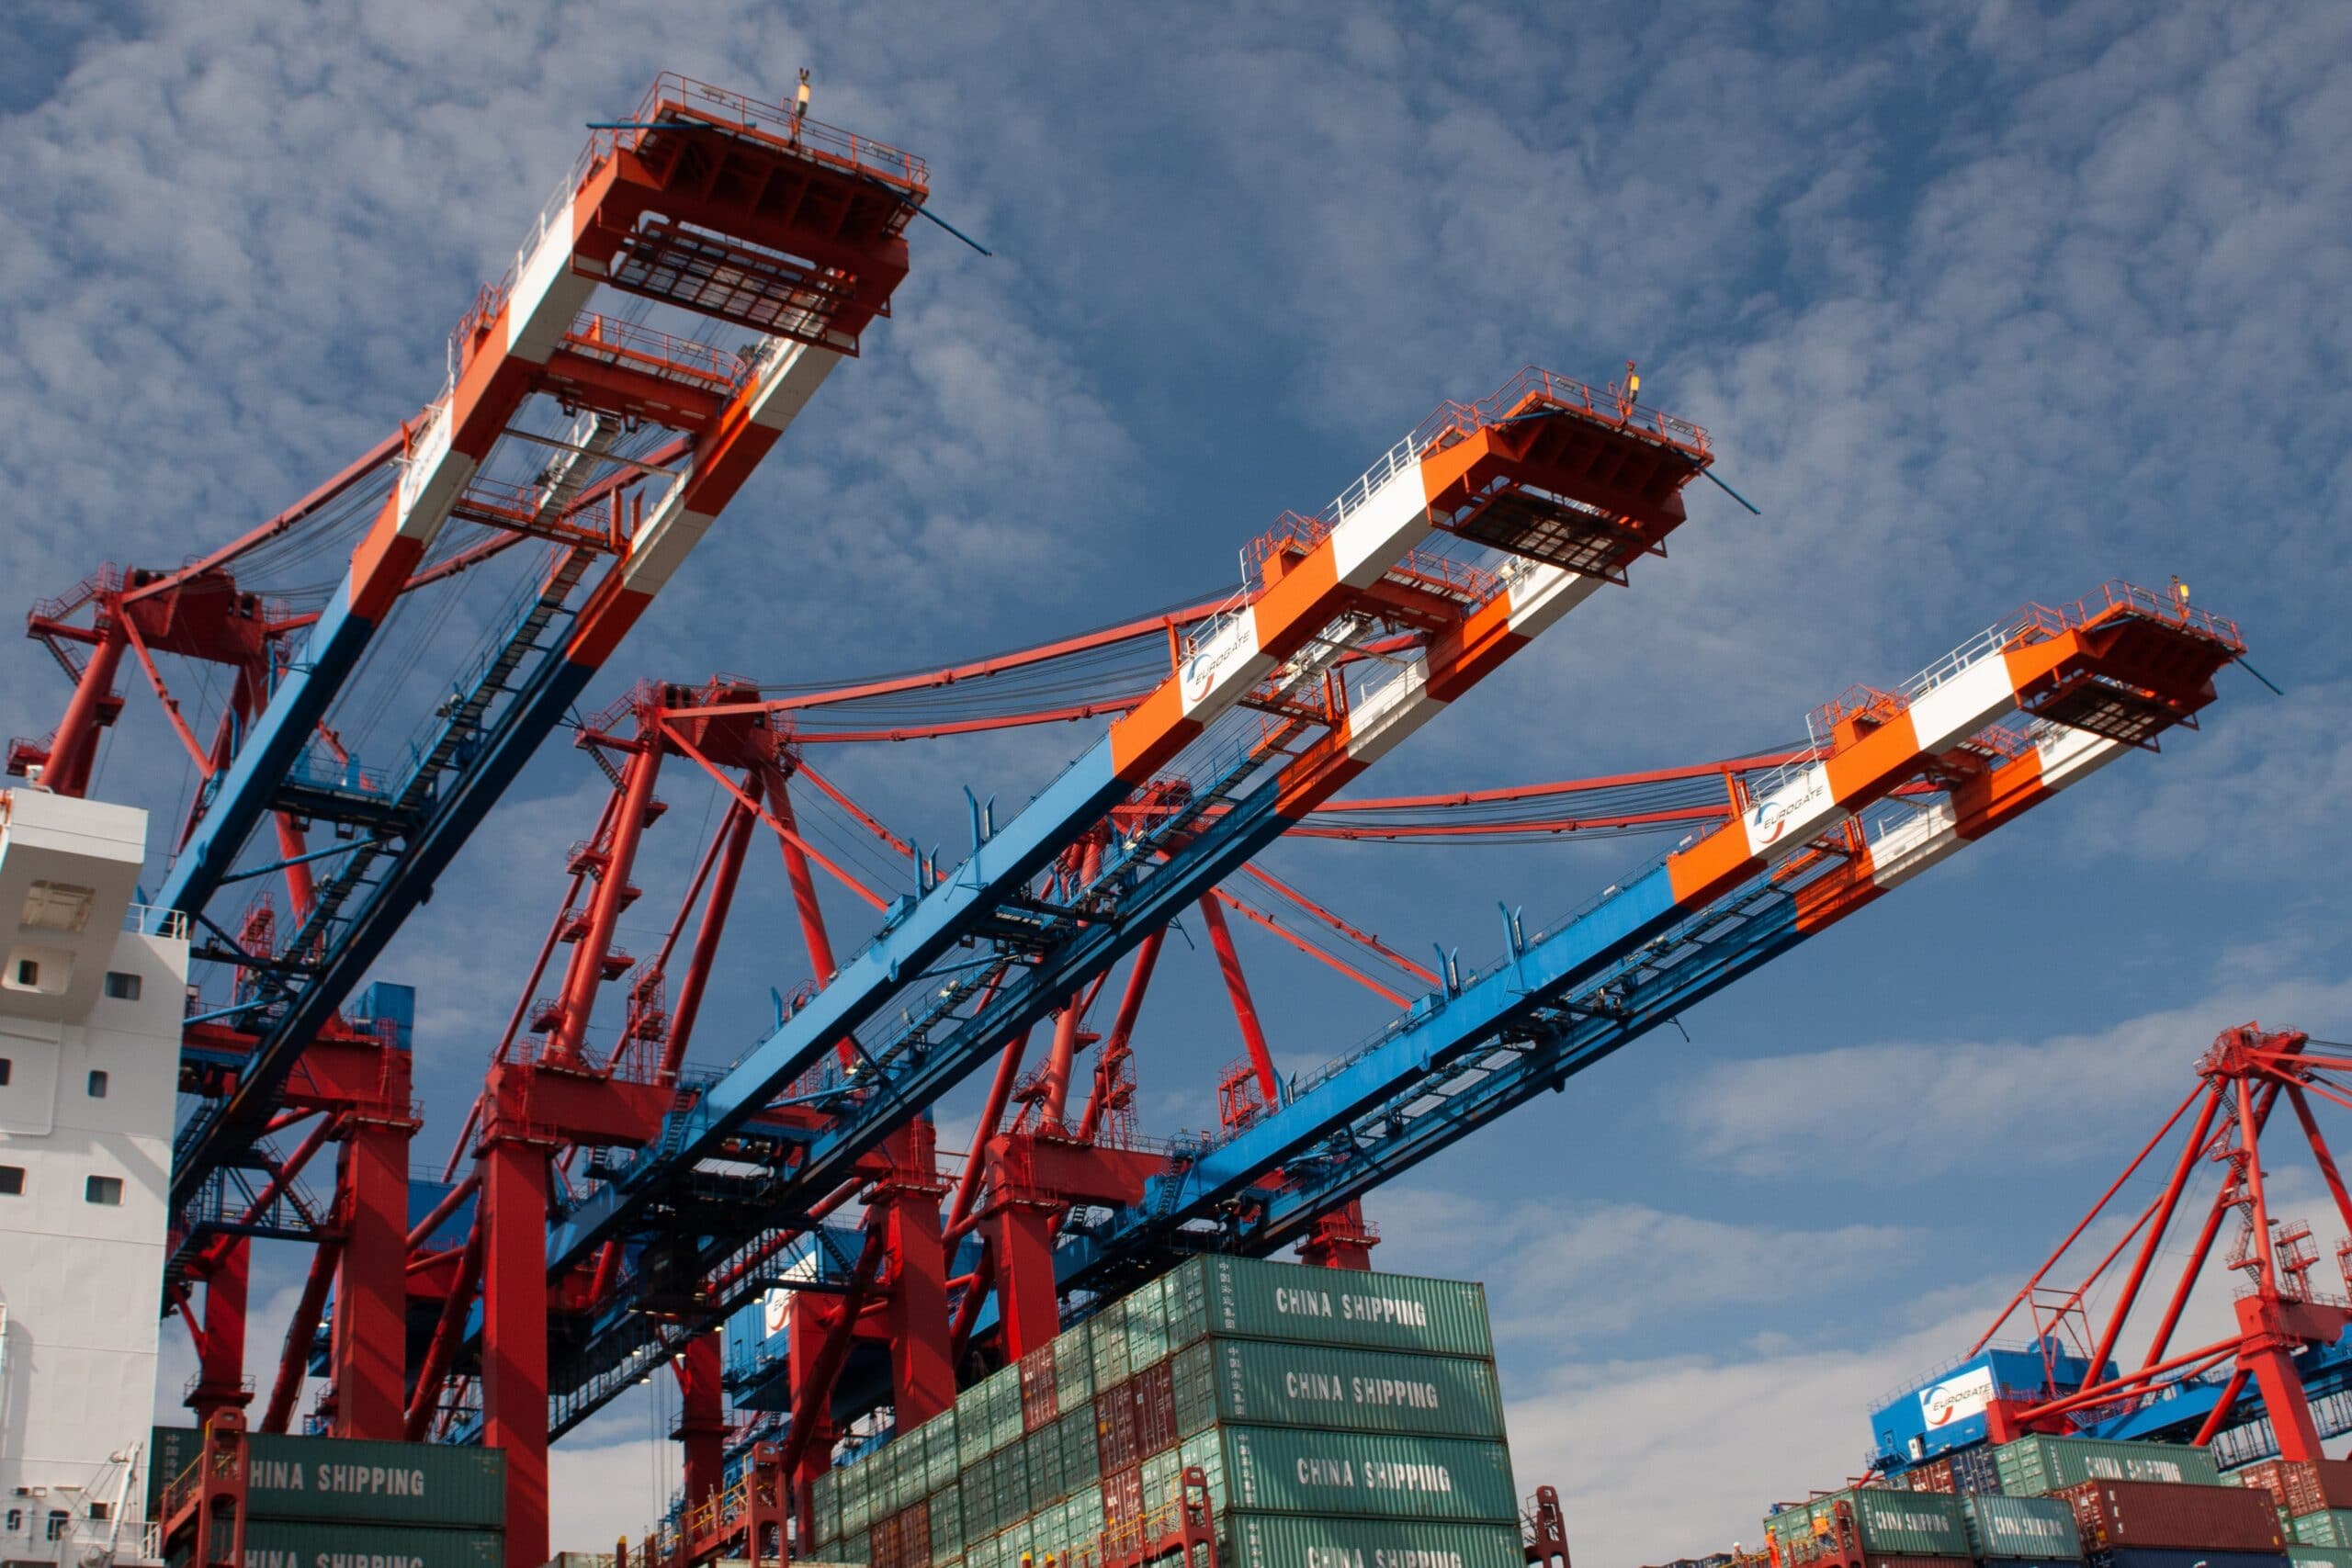 image of cranes hanging over shipping containers